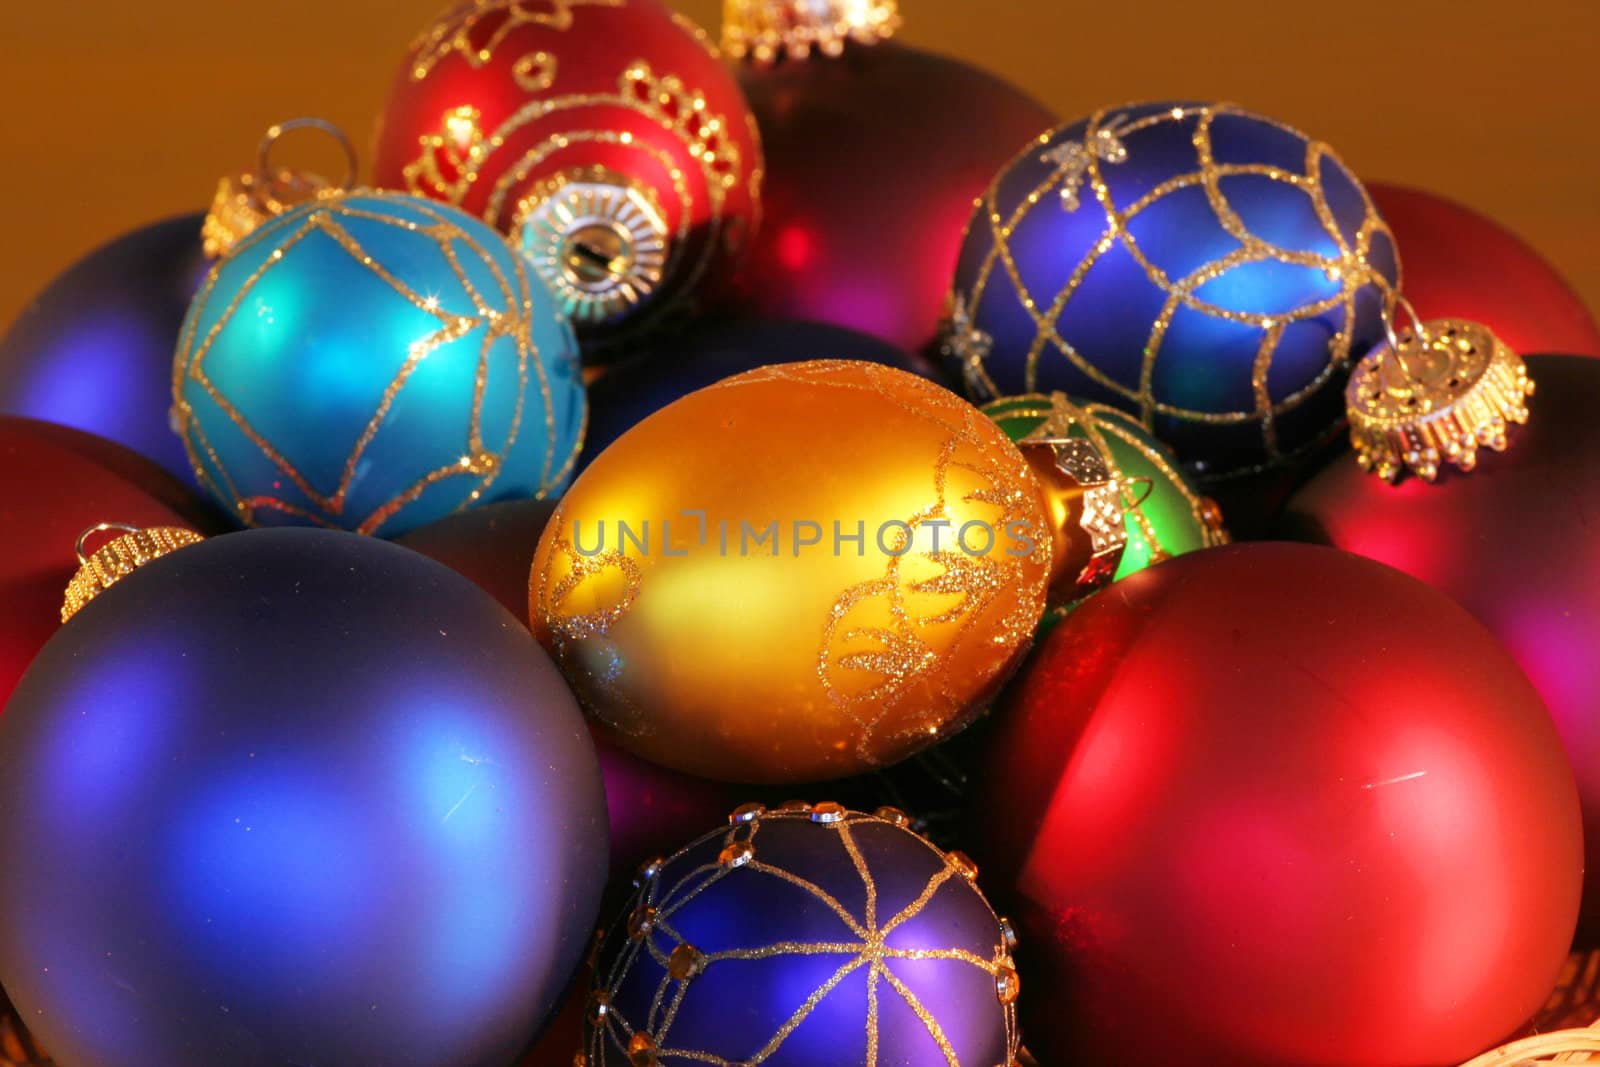 Large assortment of beautiful colorful Christmas ornaments.